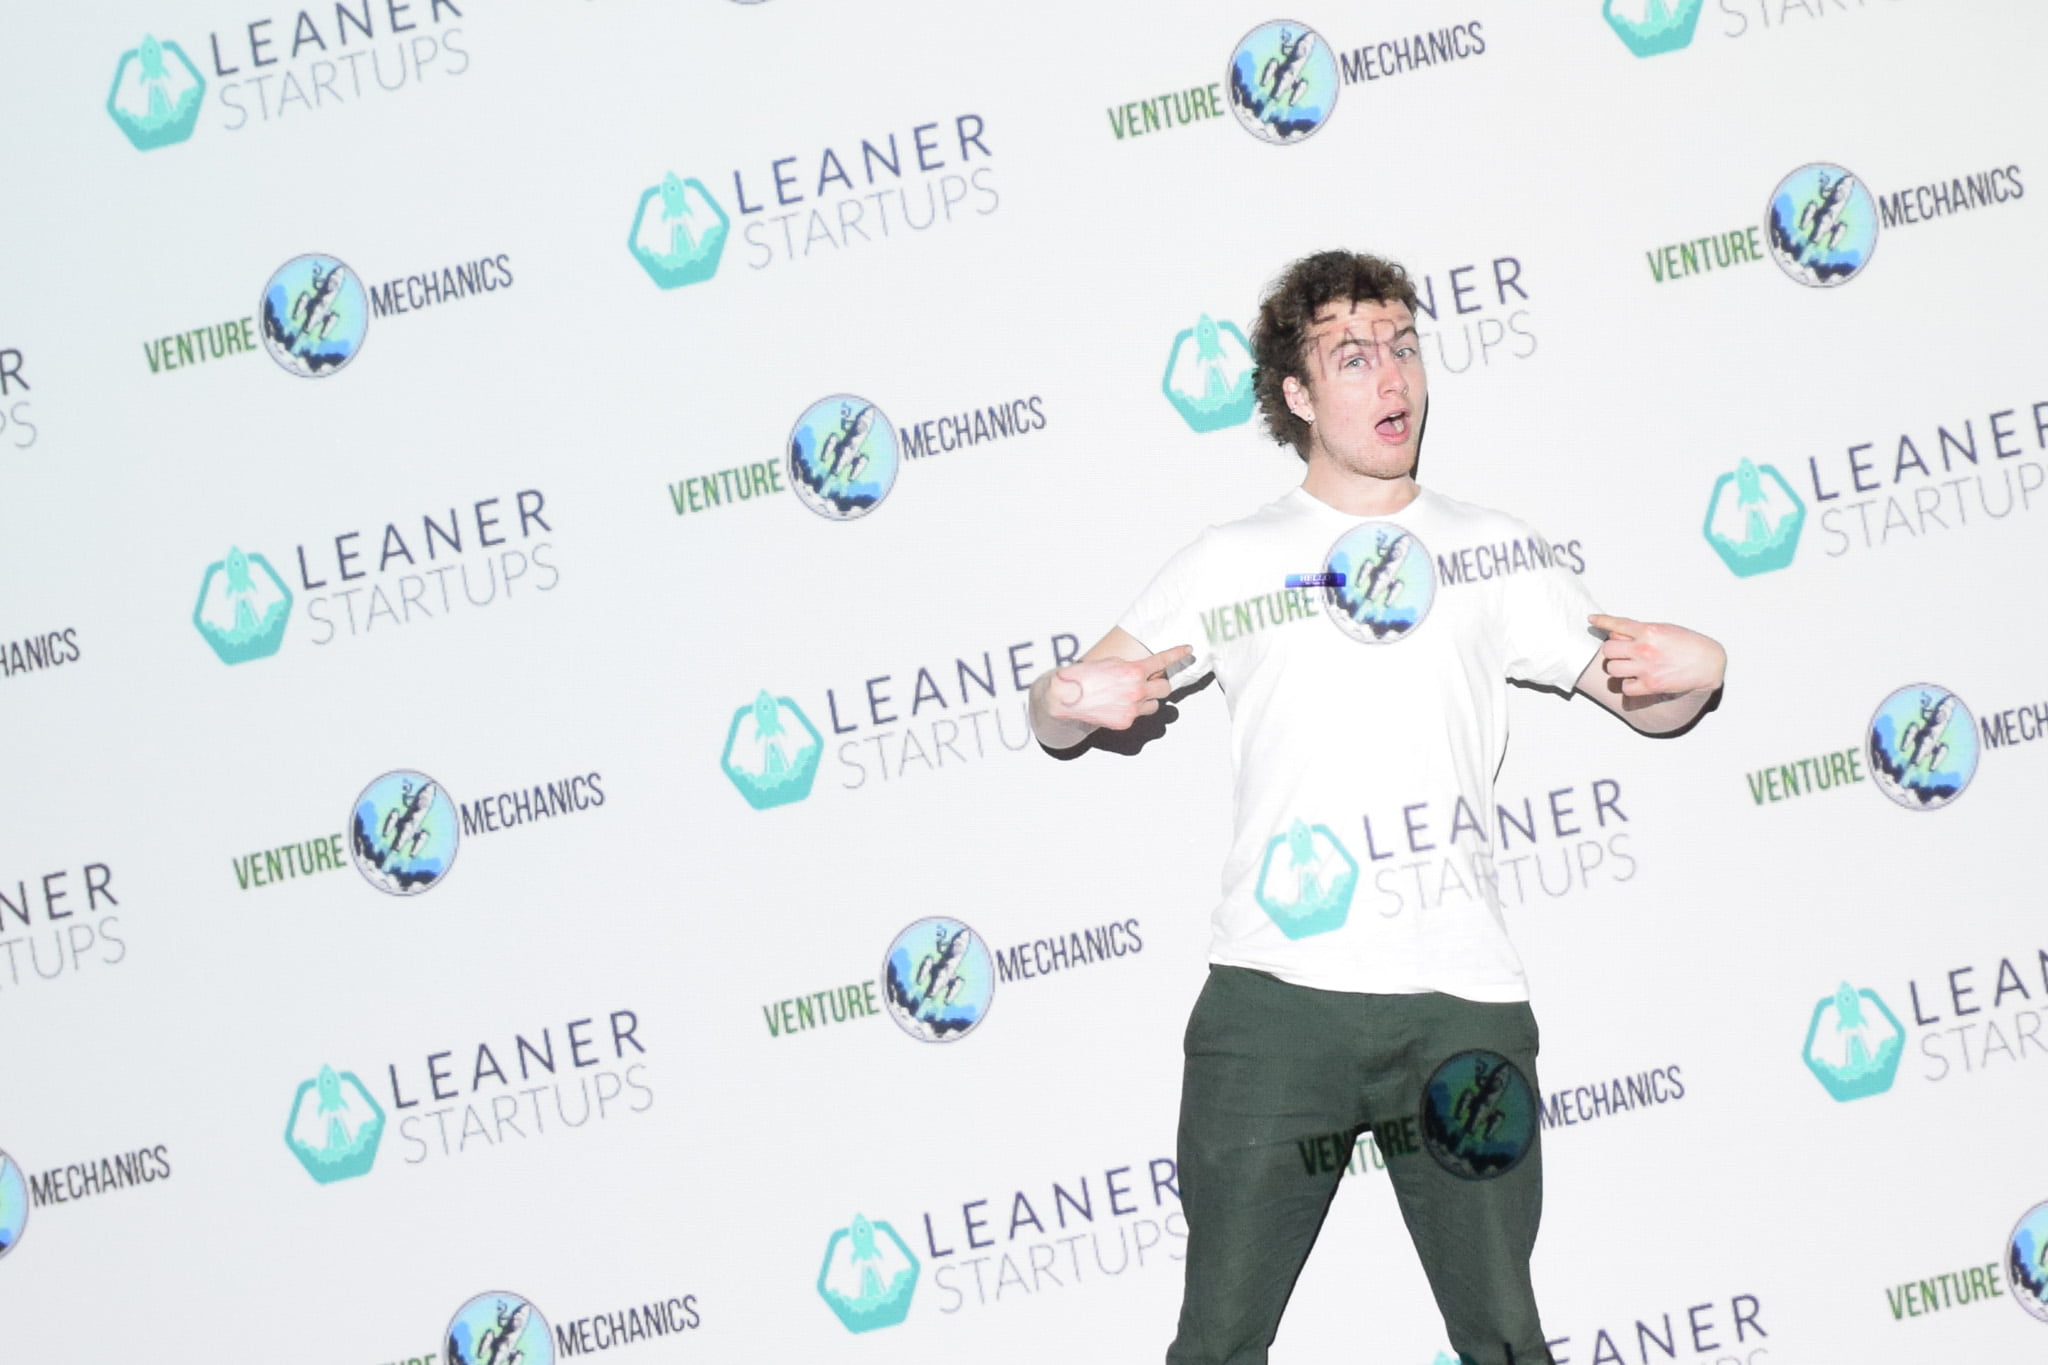 Custom photo backdrop for tech event by Leaner Startups